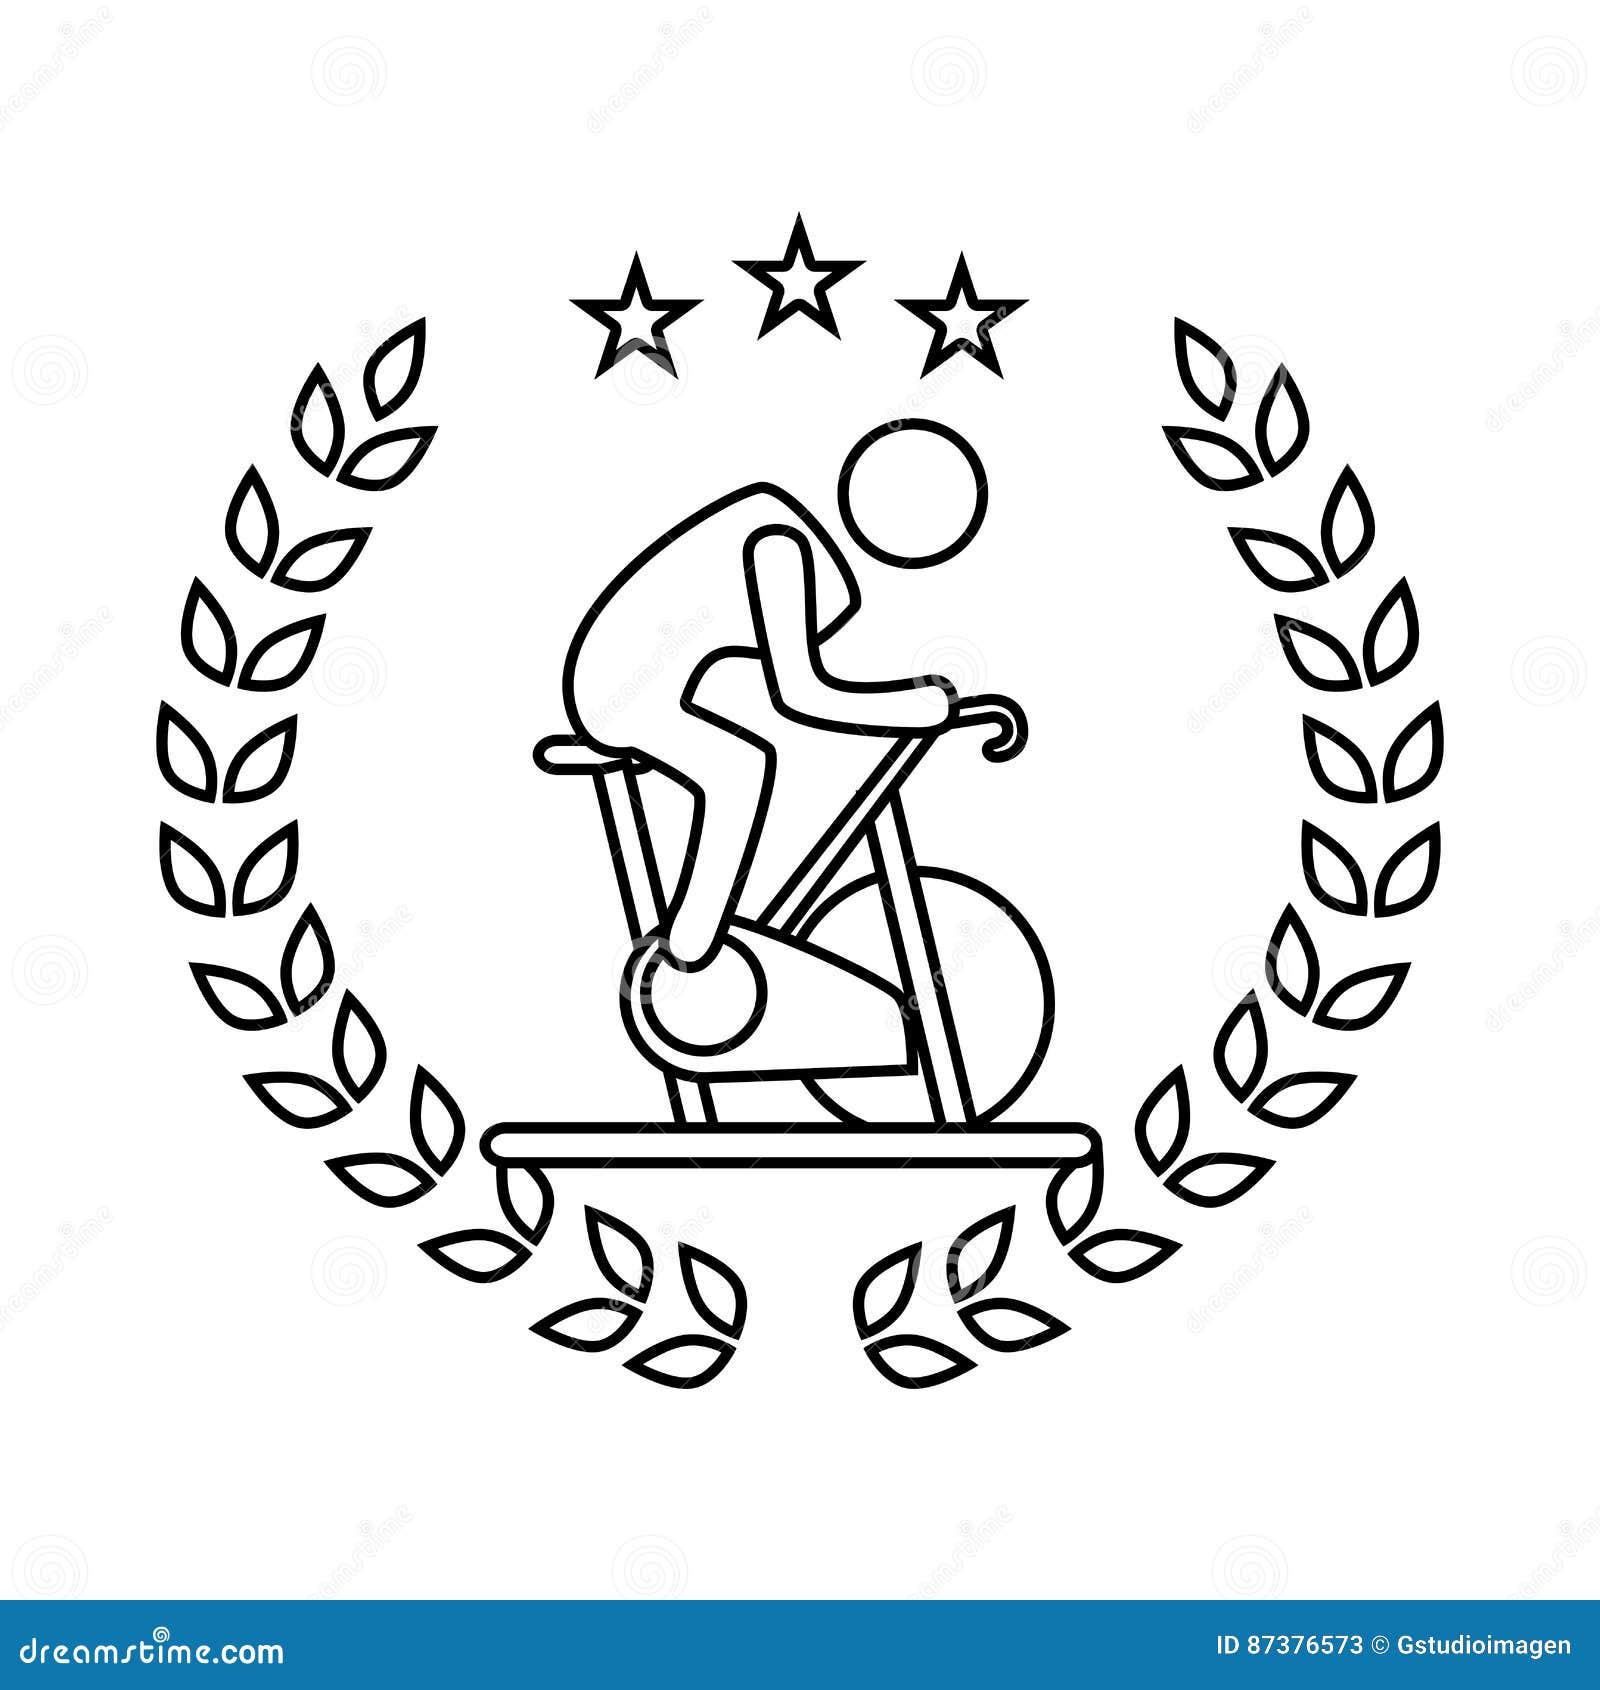 Silhouette Crown of Leaves with Pictogram Man in Spinning Bike